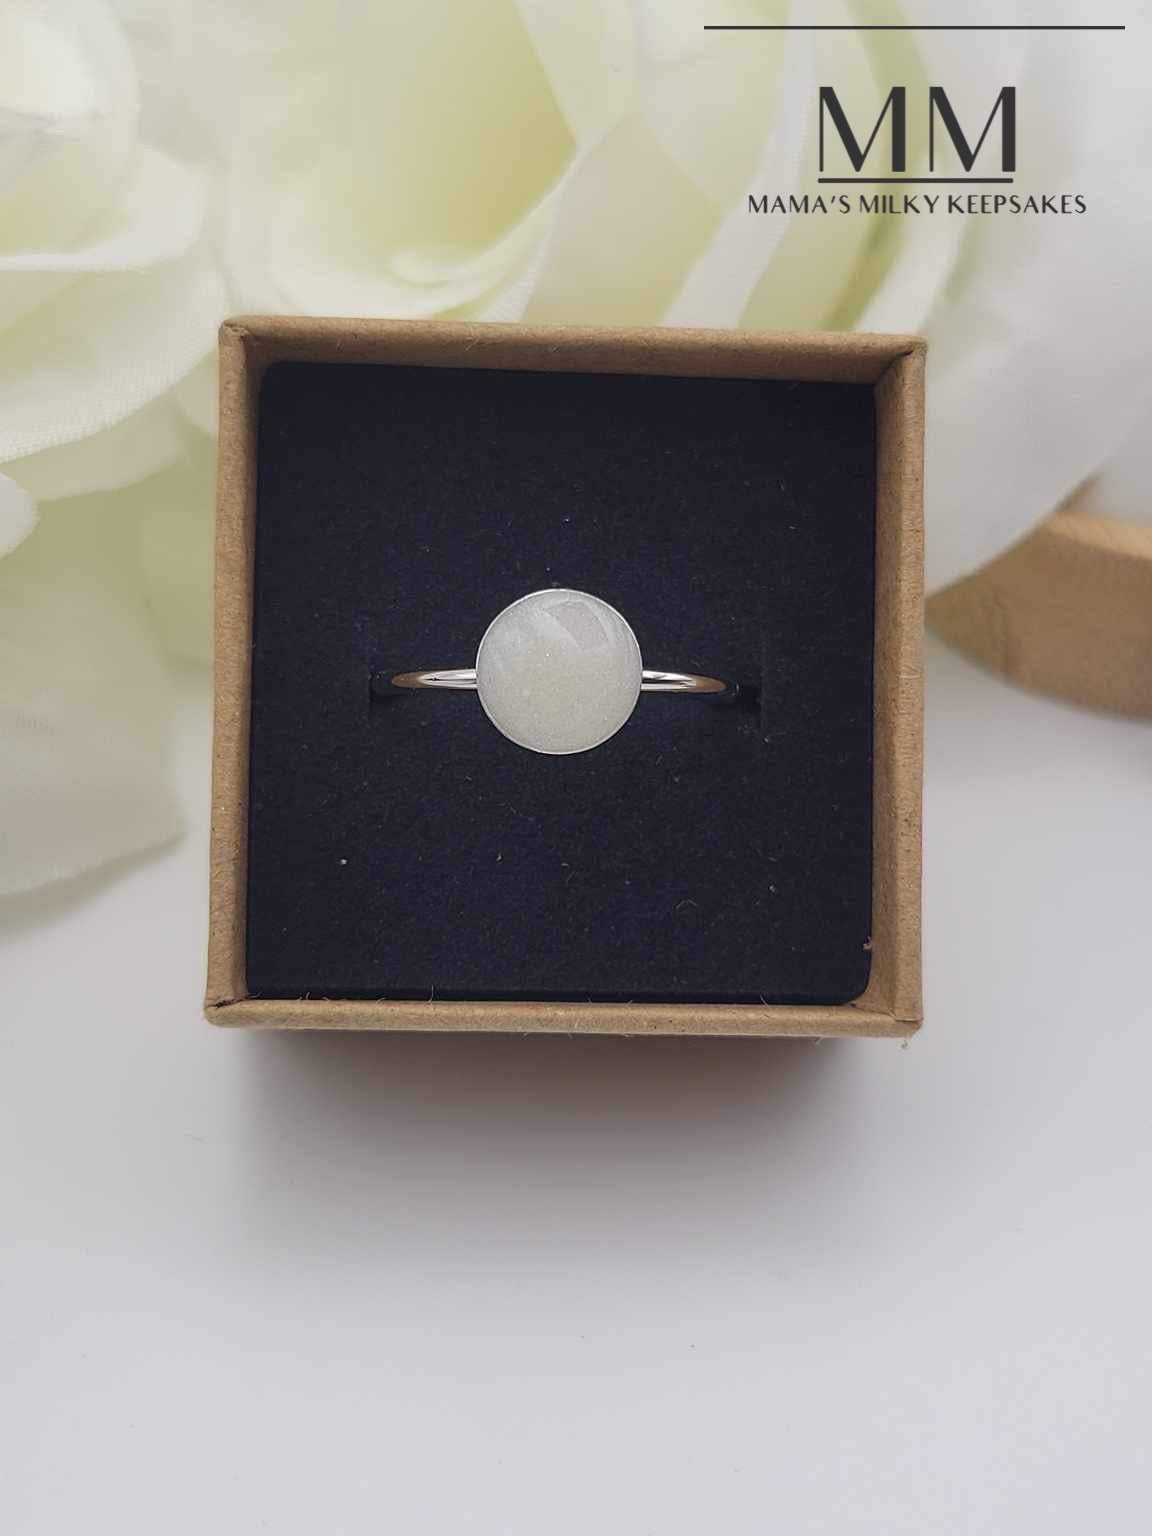 Breastmilk Round Ring, Cremation Round Ring, Keepsake Round Ring, Sterling Silver Round Ring, Hair Ring, Ash Ring, Umbilical Cord Ring, BreastmilkJewelry Round Ring